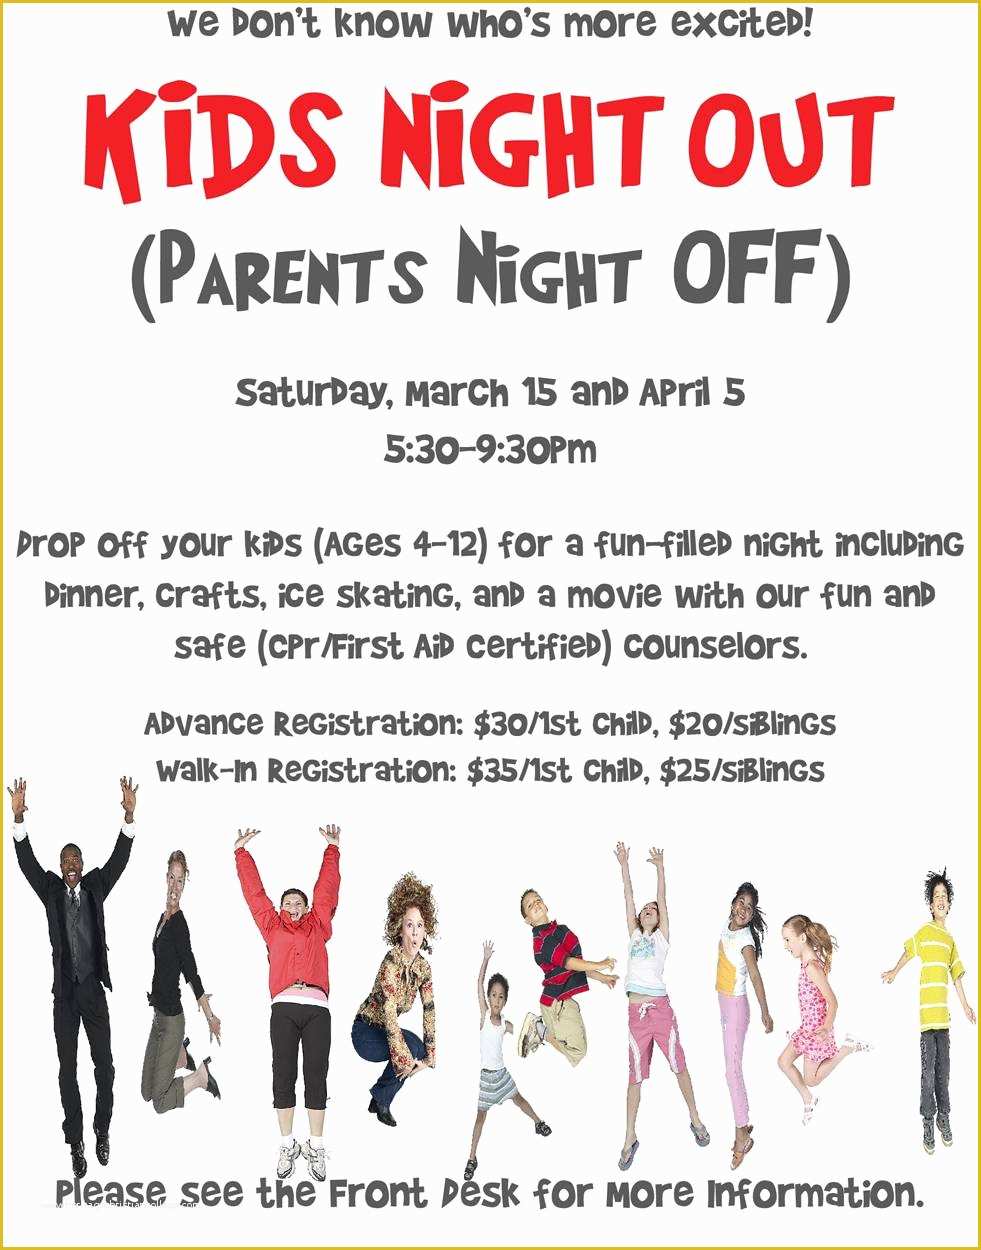 Parents Night Out Flyer Template Free Of Parents Night Out Flyer Template